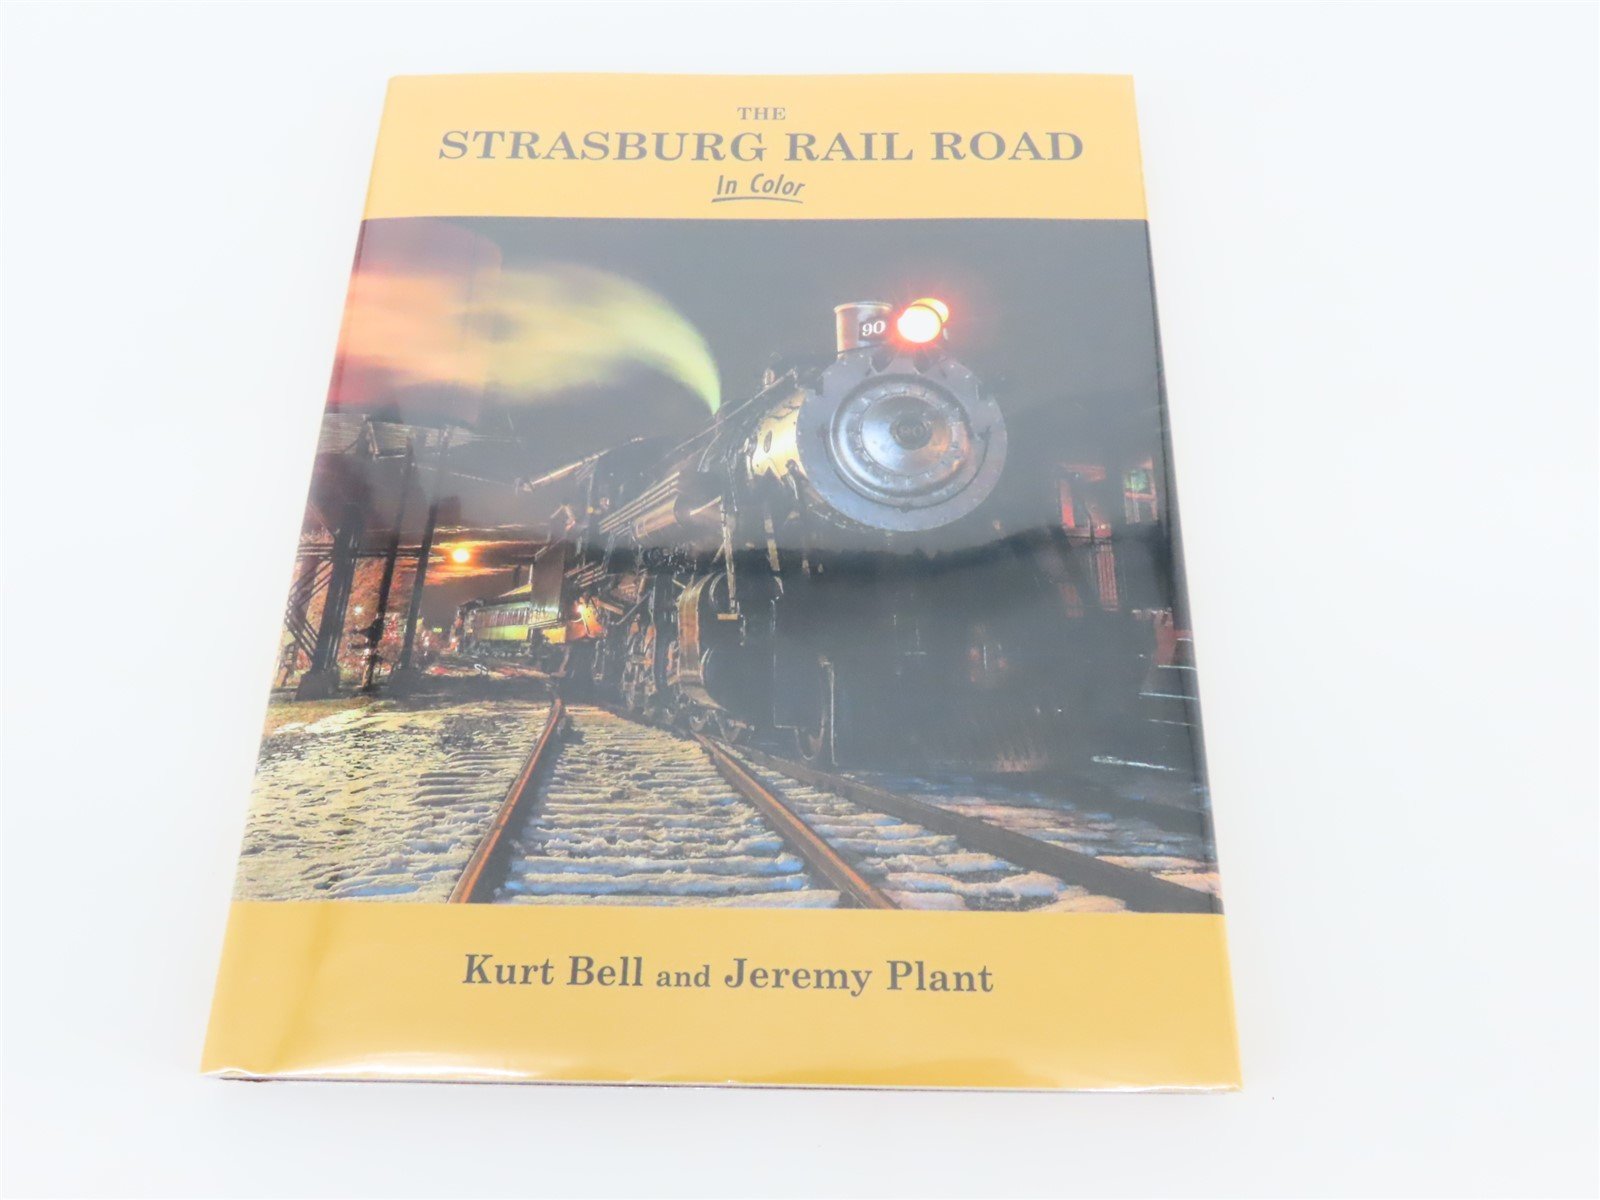 Morning Sun: The Strasburg Rail Road by Kurt Bell and Jeremy Plant ©2015 HC Book